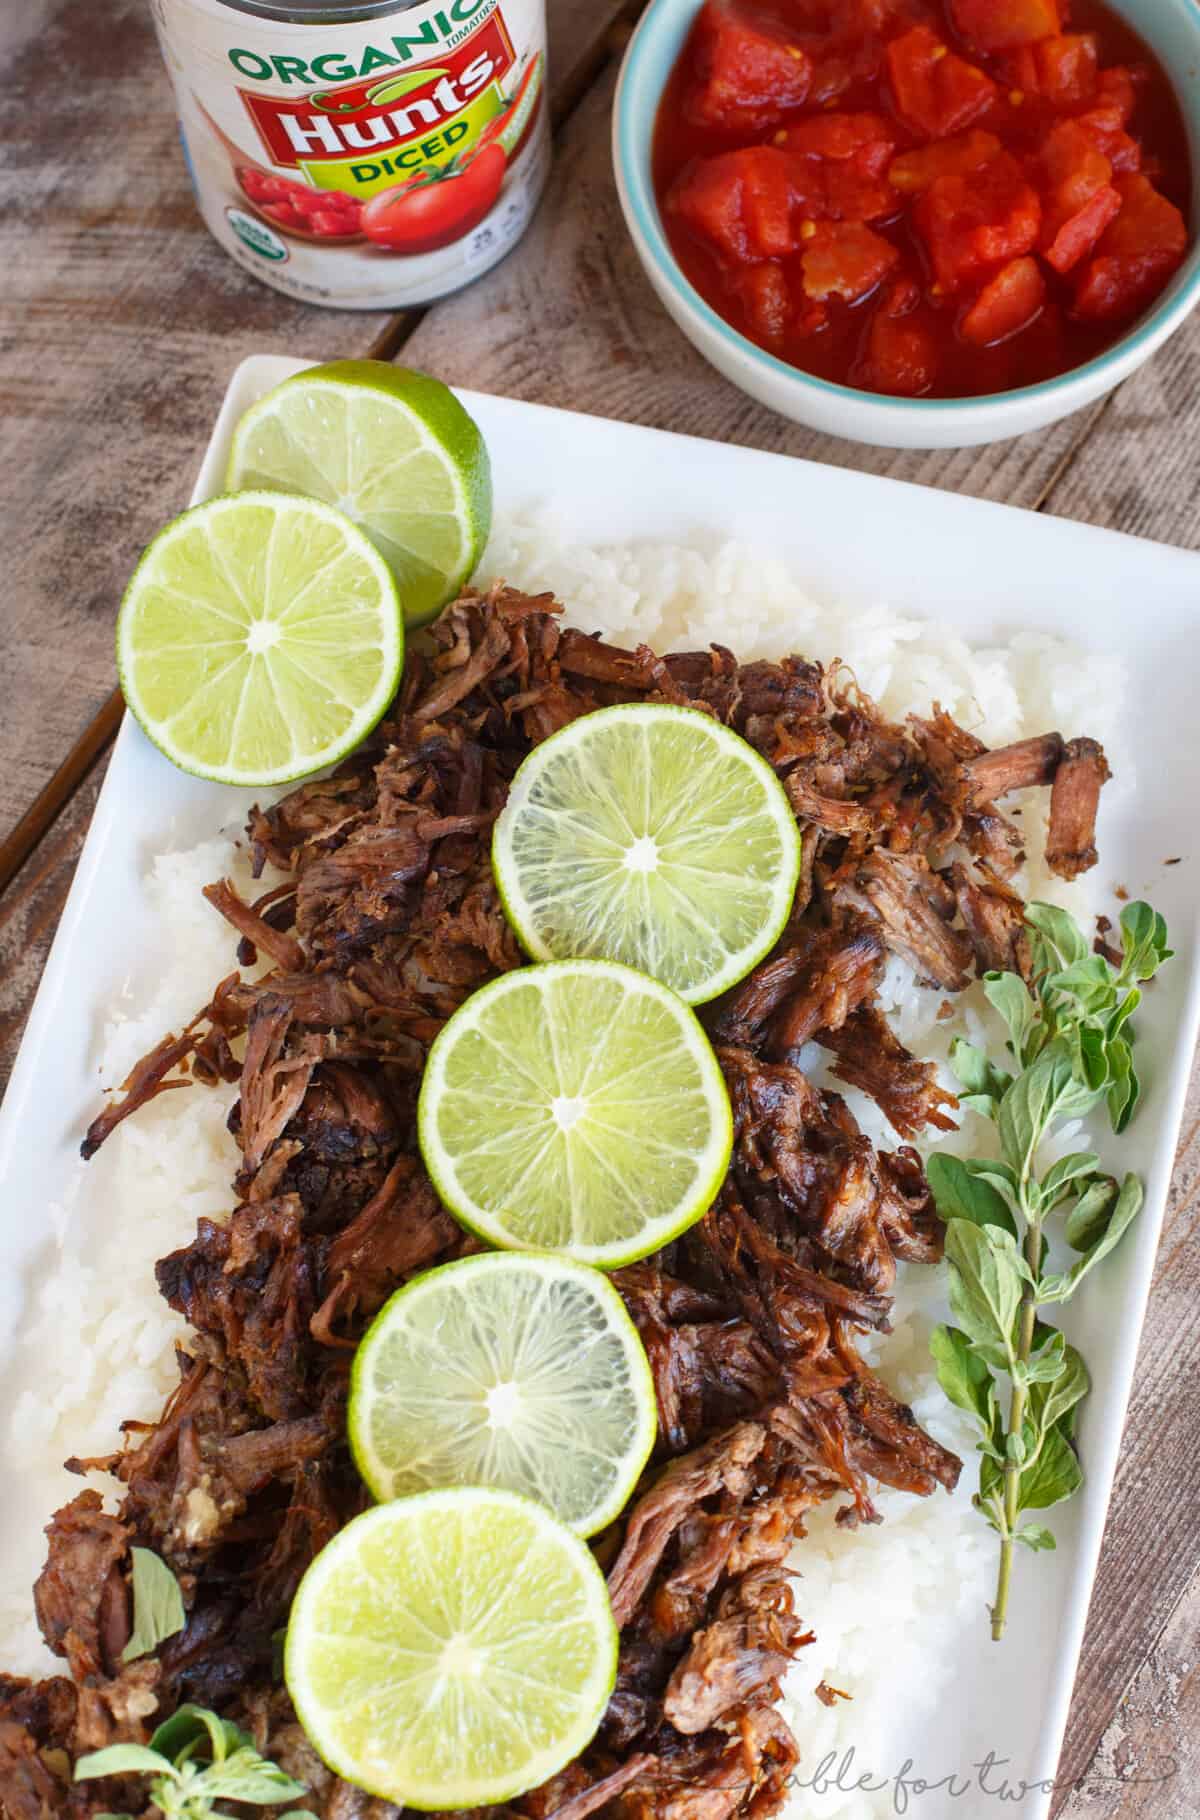 This slow cooker mojo beef and rice is an incredibly flavorful slow cooker meal that is melt-in-your-mouth delicious! Full of citrus flavor and a hint of spice! #HuntsDifference #ad